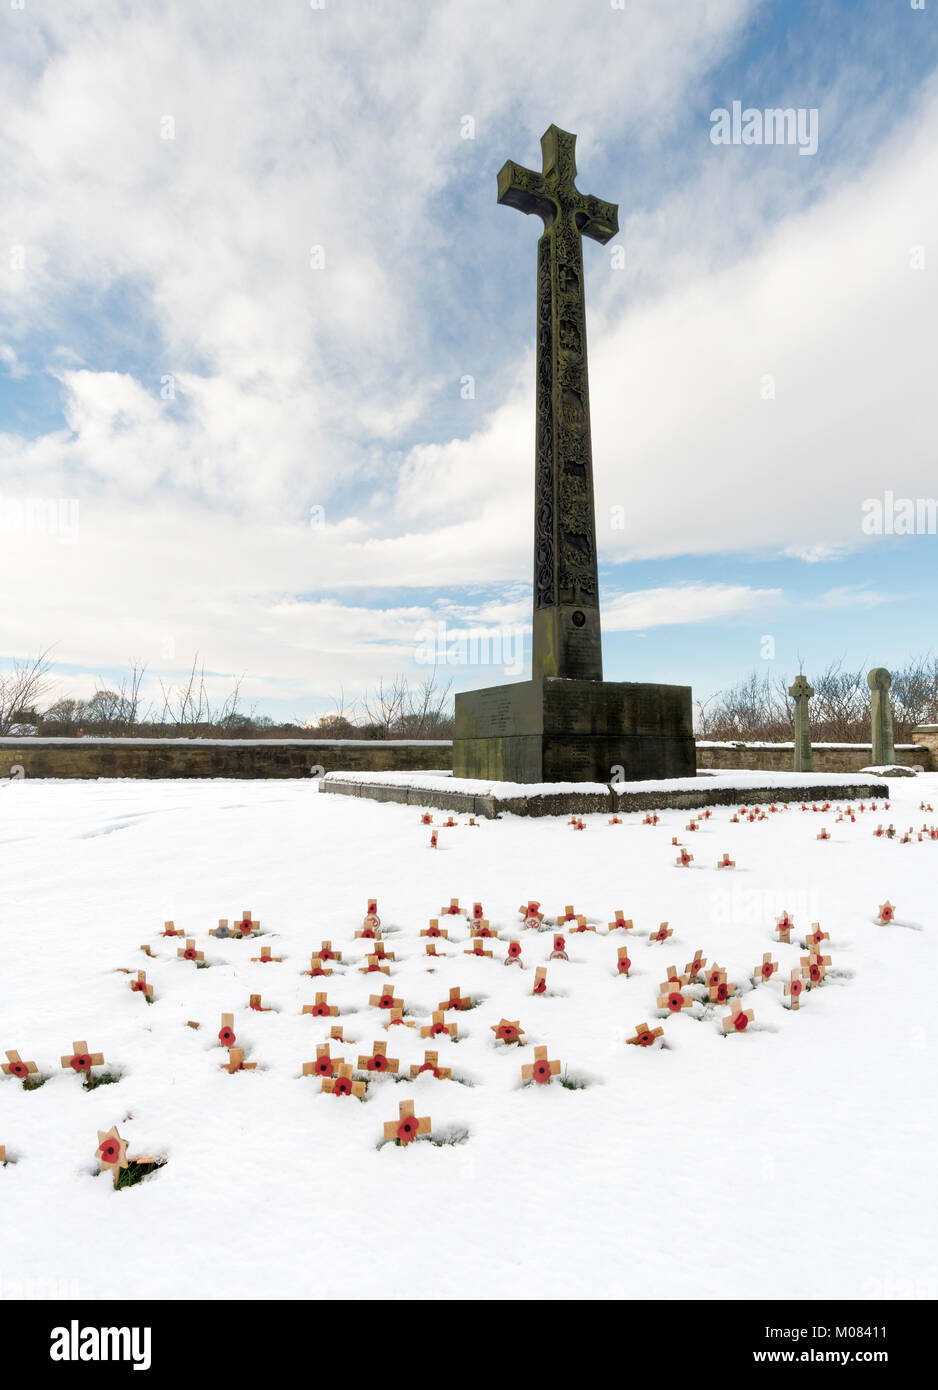 A forest of small wooden crosses planted in snow before the DLI memorial cross in Palace Green, Durham City, England, UK Stock Photo